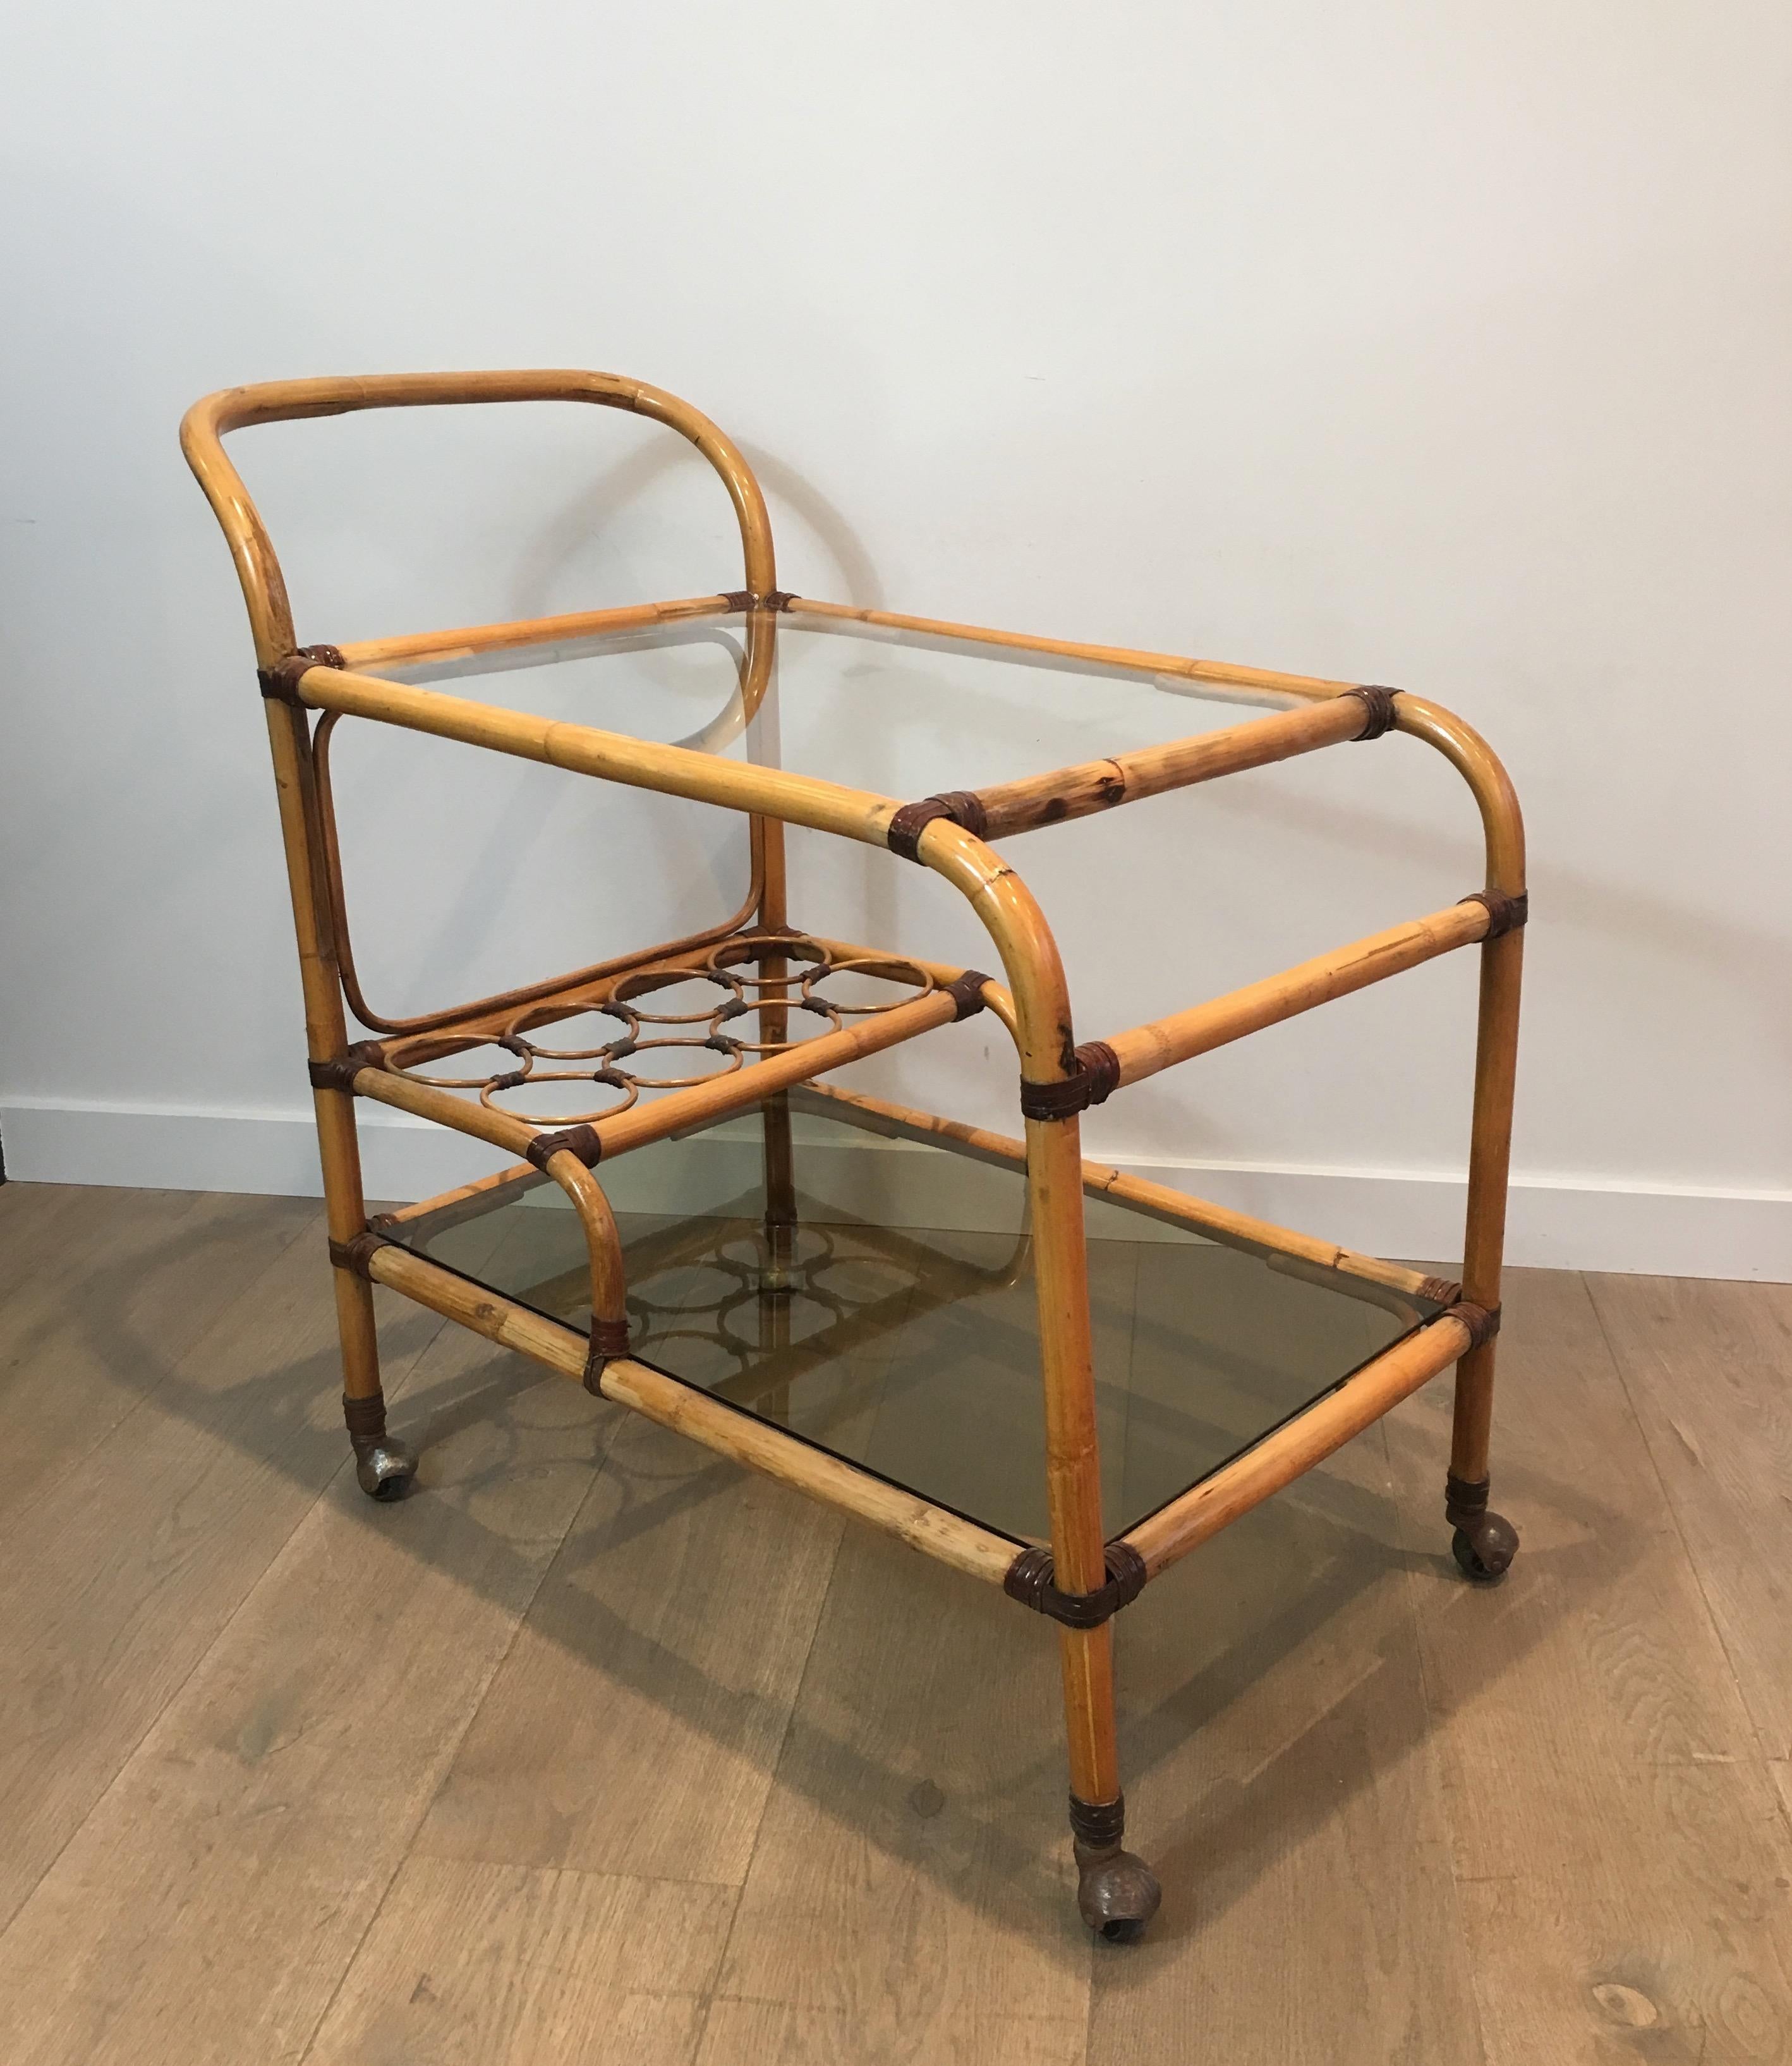 Interesting Rattan Drinks Trolley with Leather Links, French, circa 1950 For Sale 5